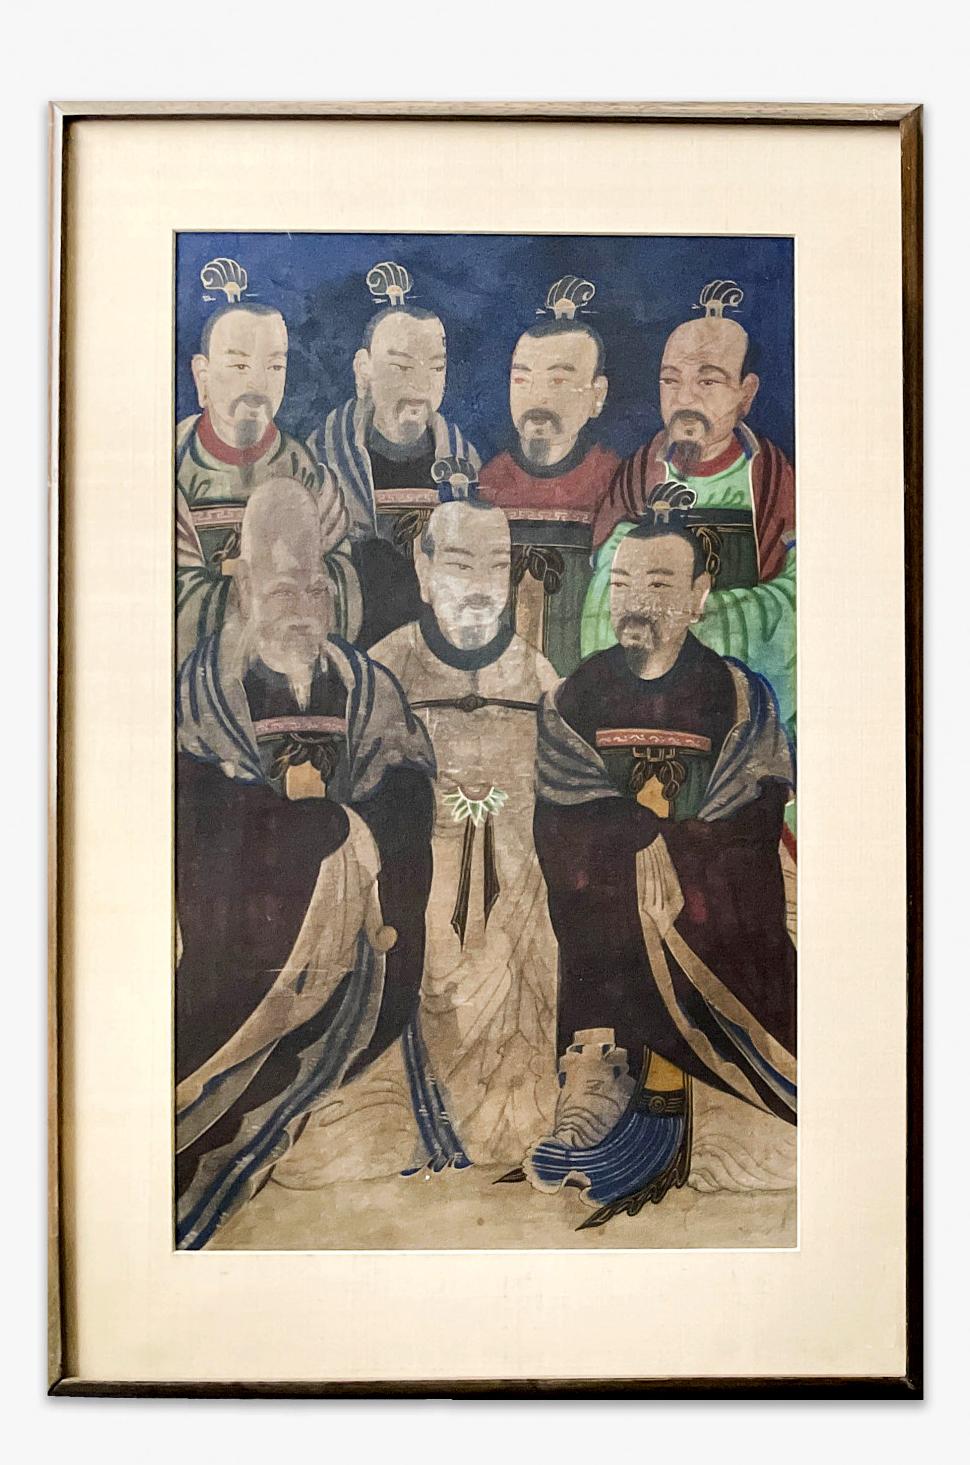 A Korean folk painting watercolor on linen (silk) with a cloth mat and walnut wood frame. The work is in the shamanistic style and depicts the Taoist personification (Chilwon Seonggun) of the seven stars of the Big Dipper (Chilseong Yeorae). A